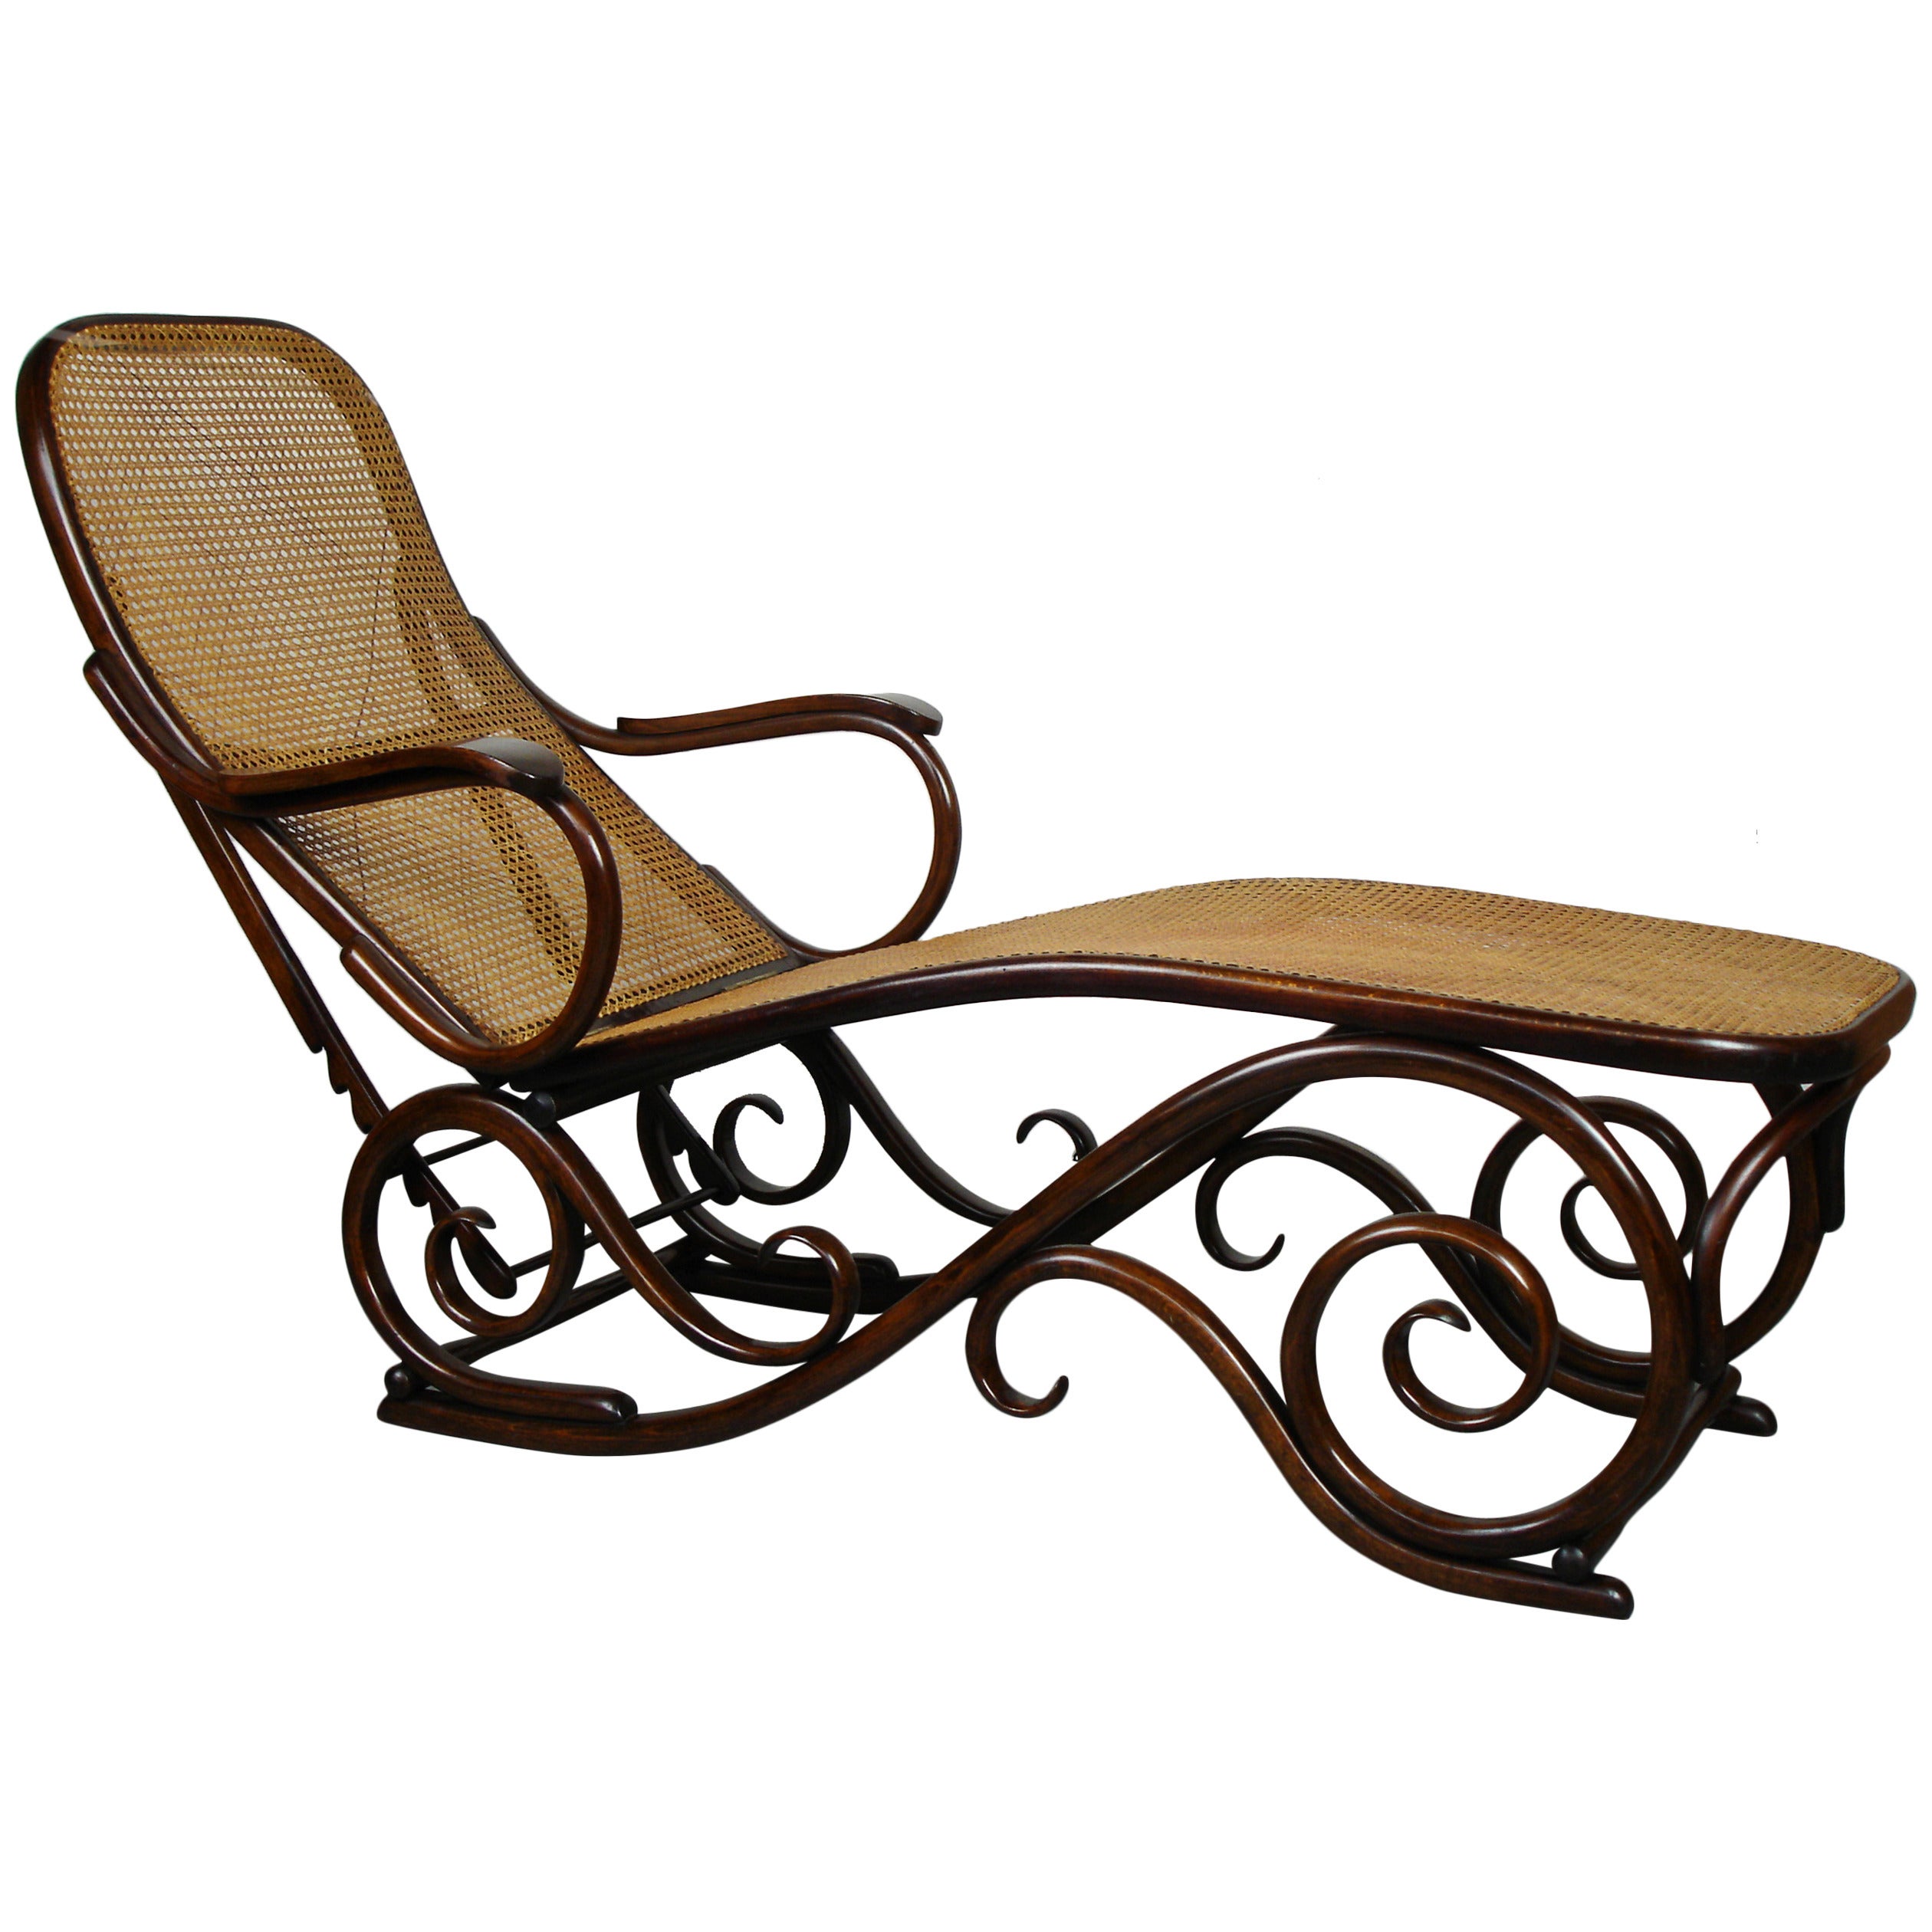 Bent Wood Chaise Longue Attributed to Thonet